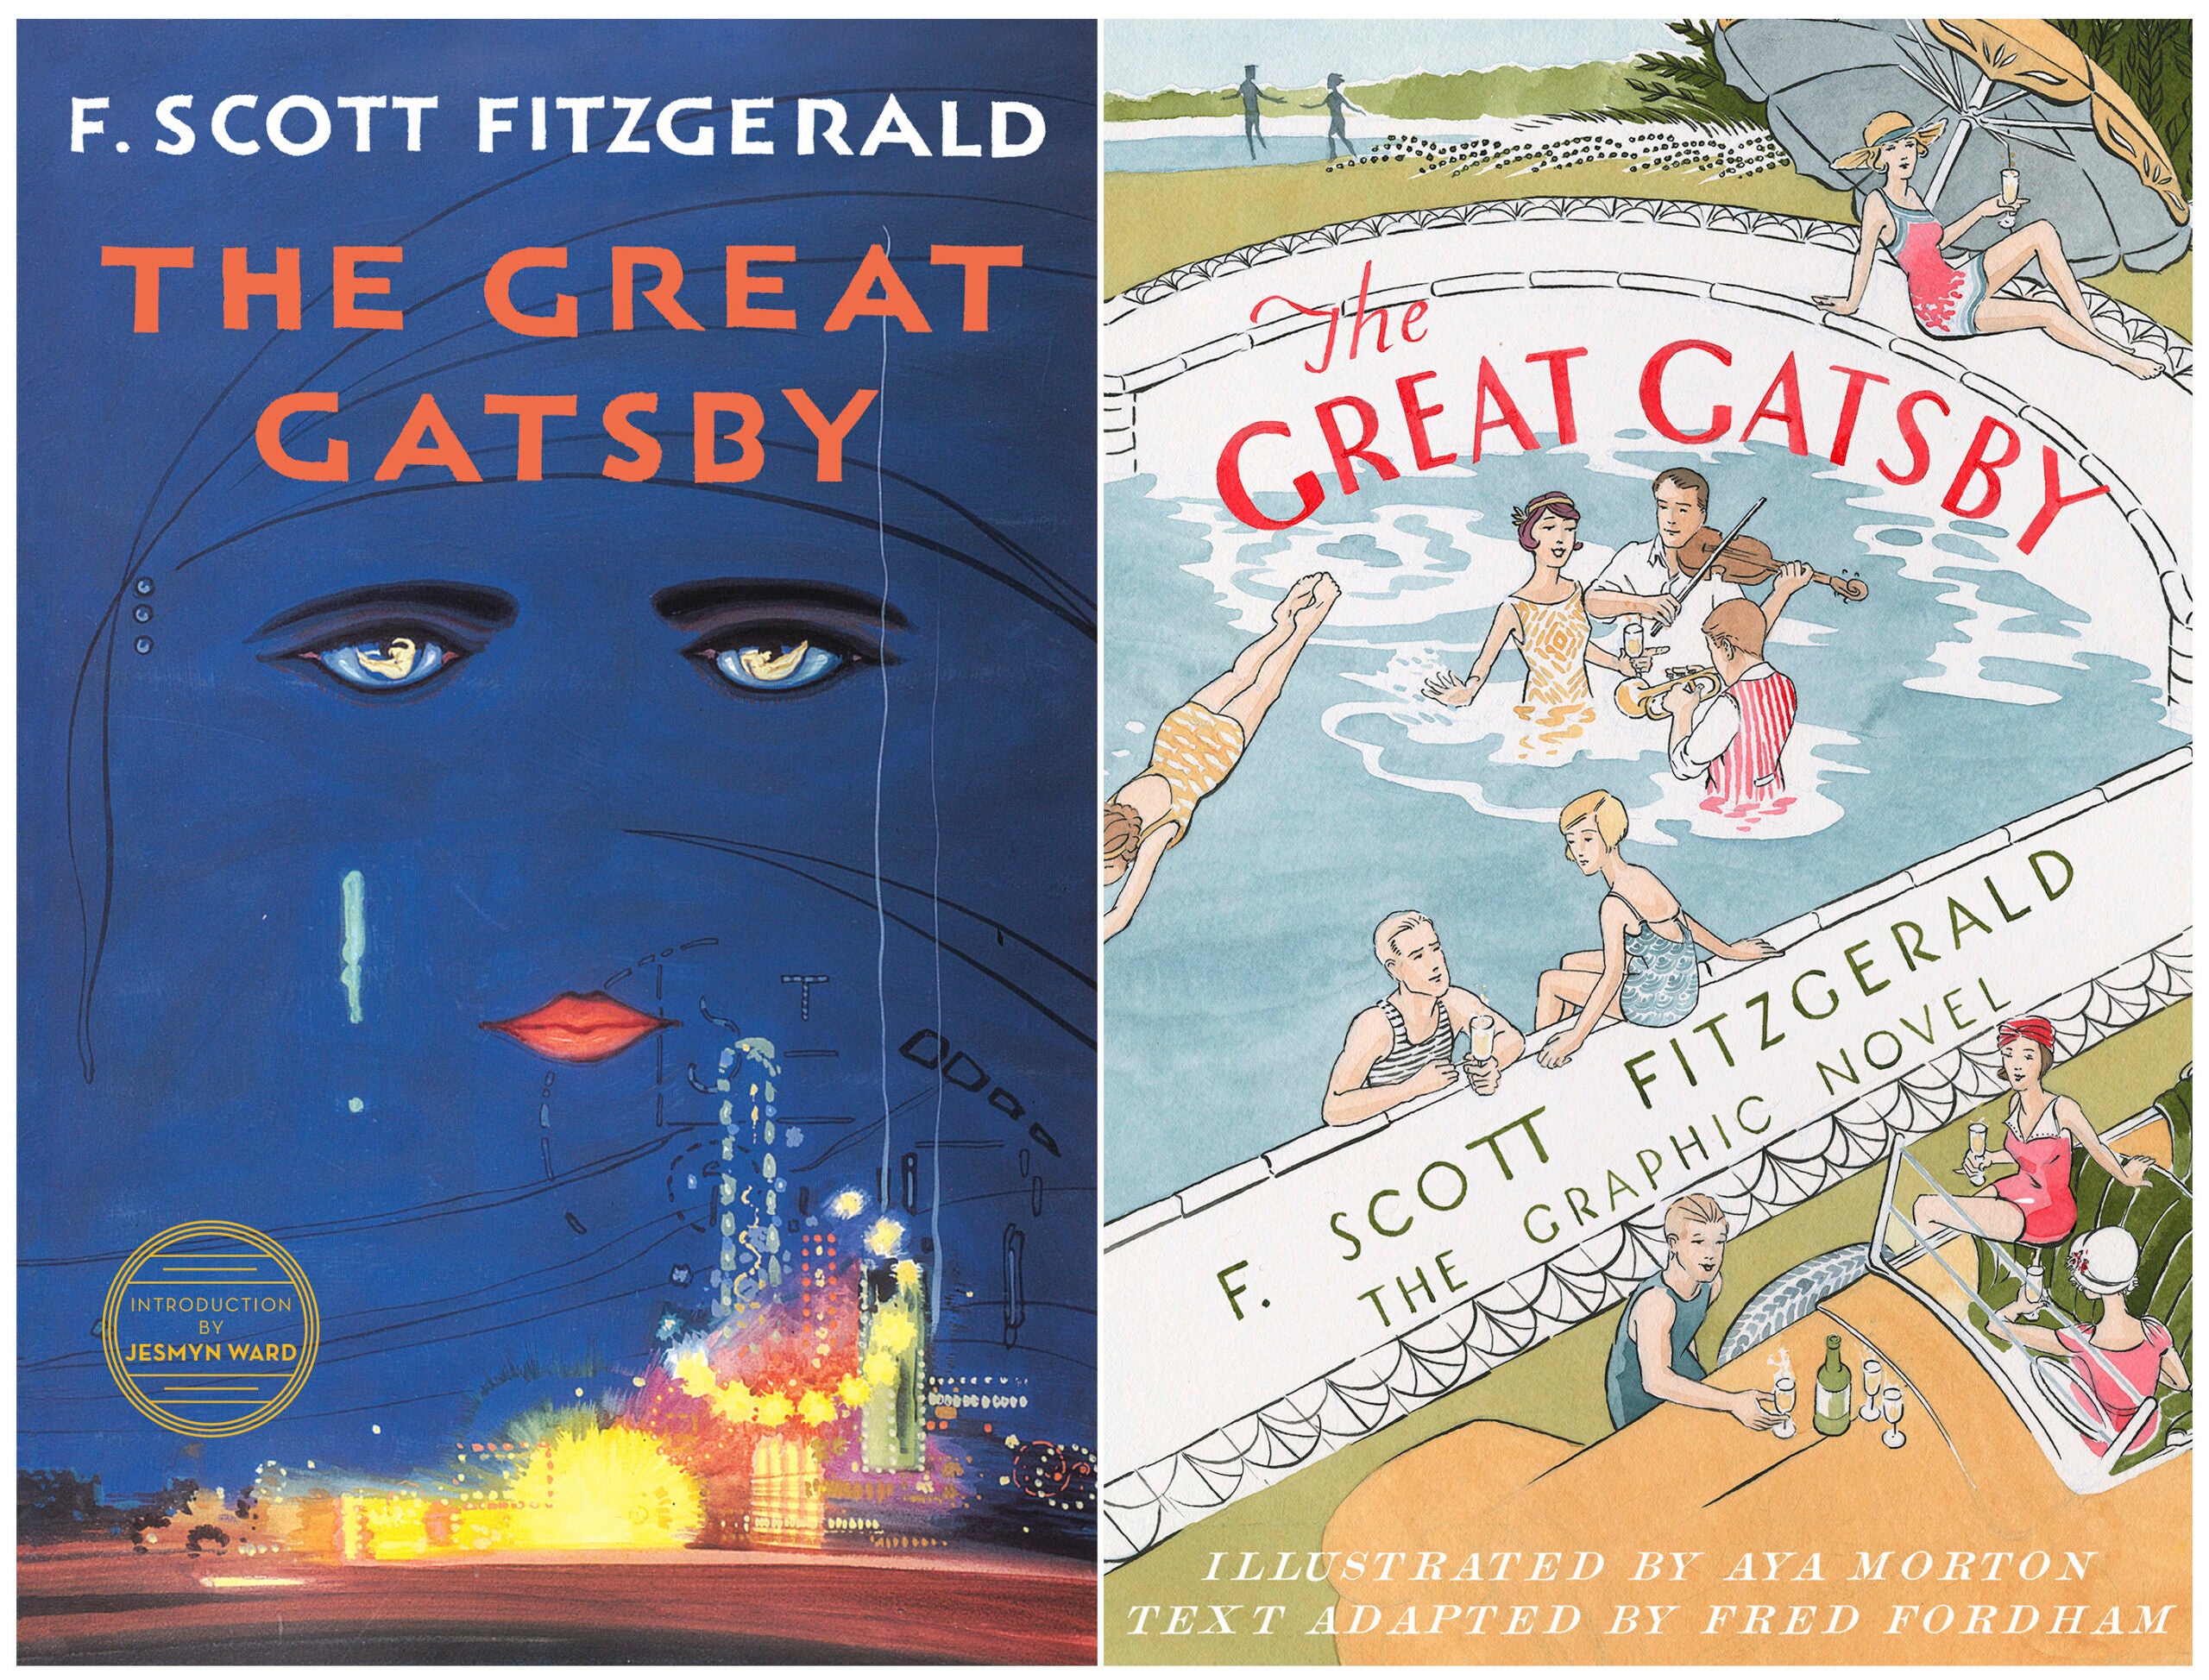 With its copyright expiring,`Great Gatsby' is up for grabs in 2021